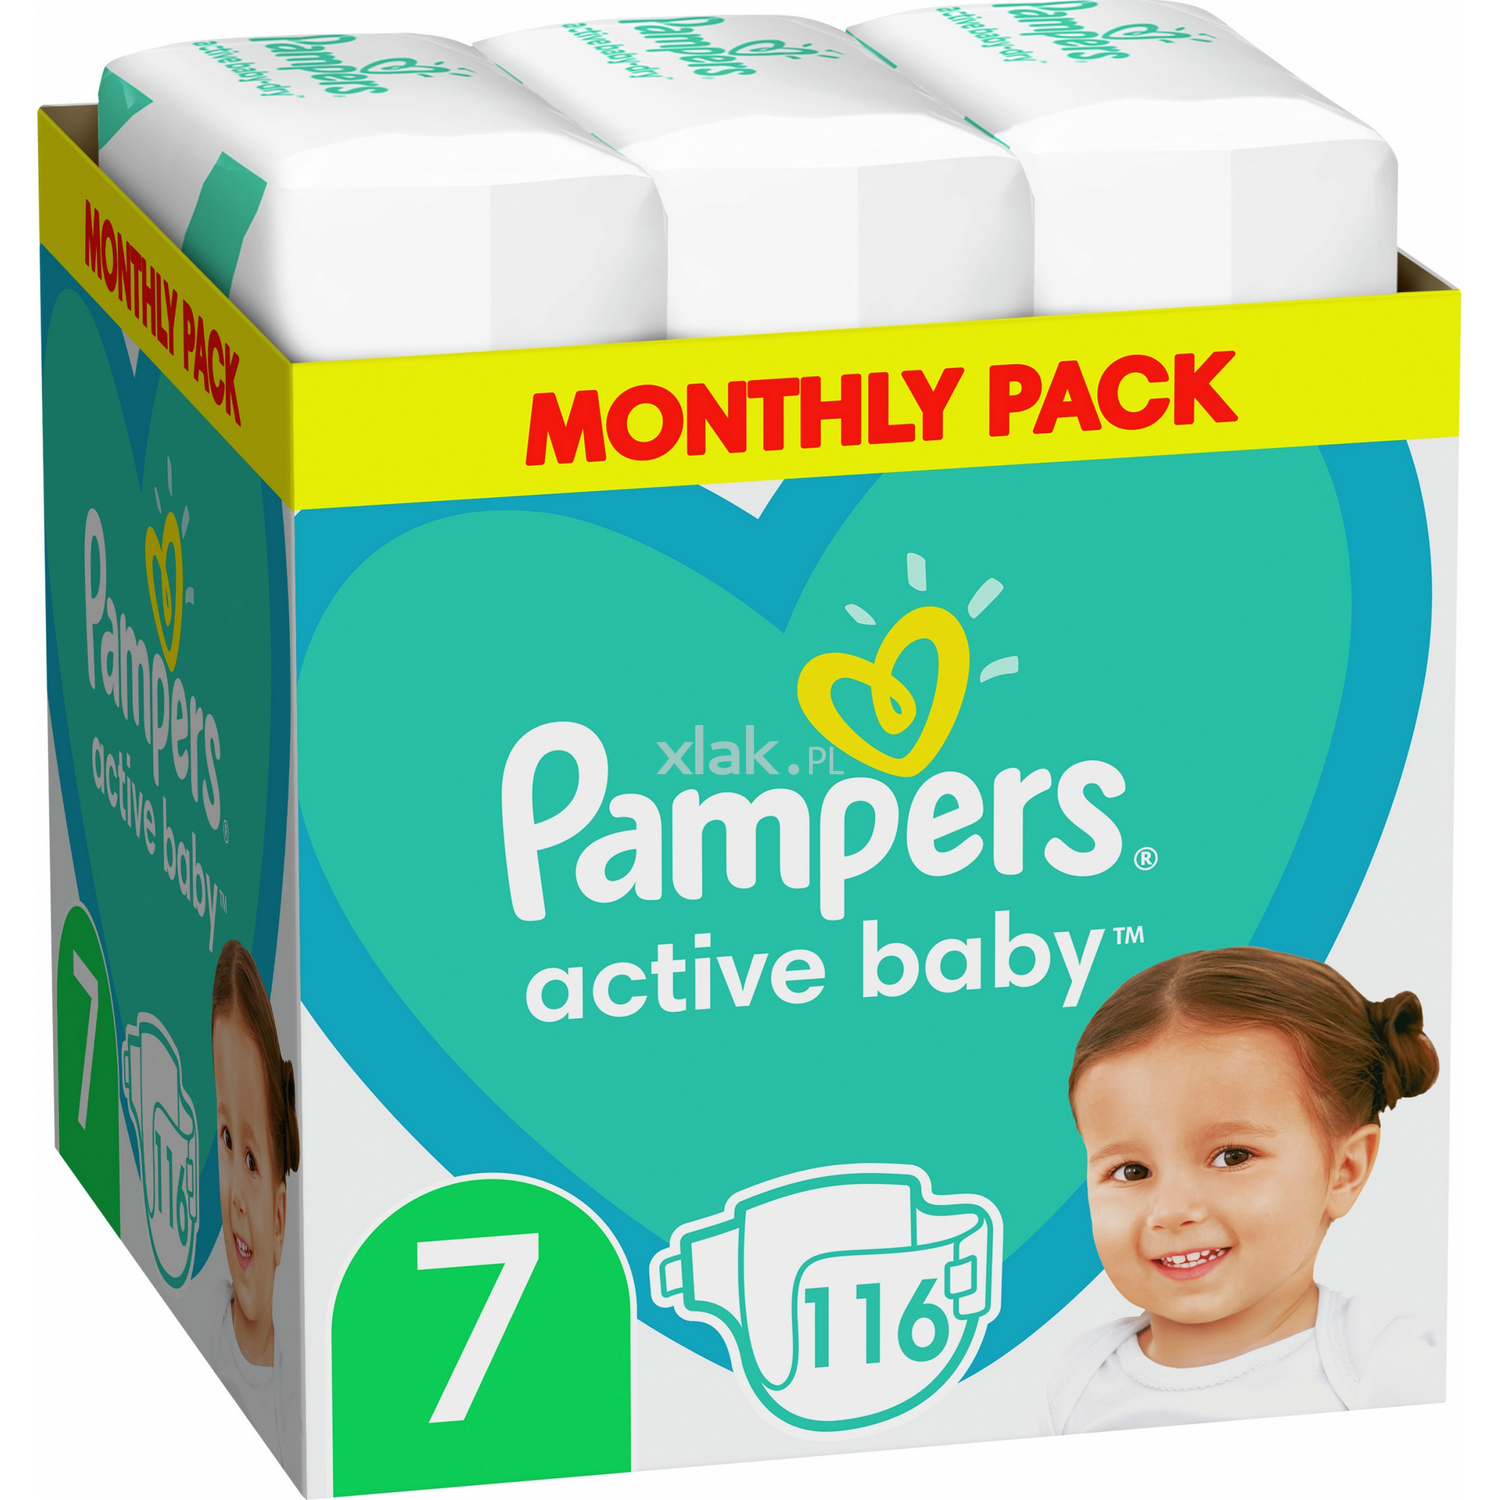 pampers epson l800